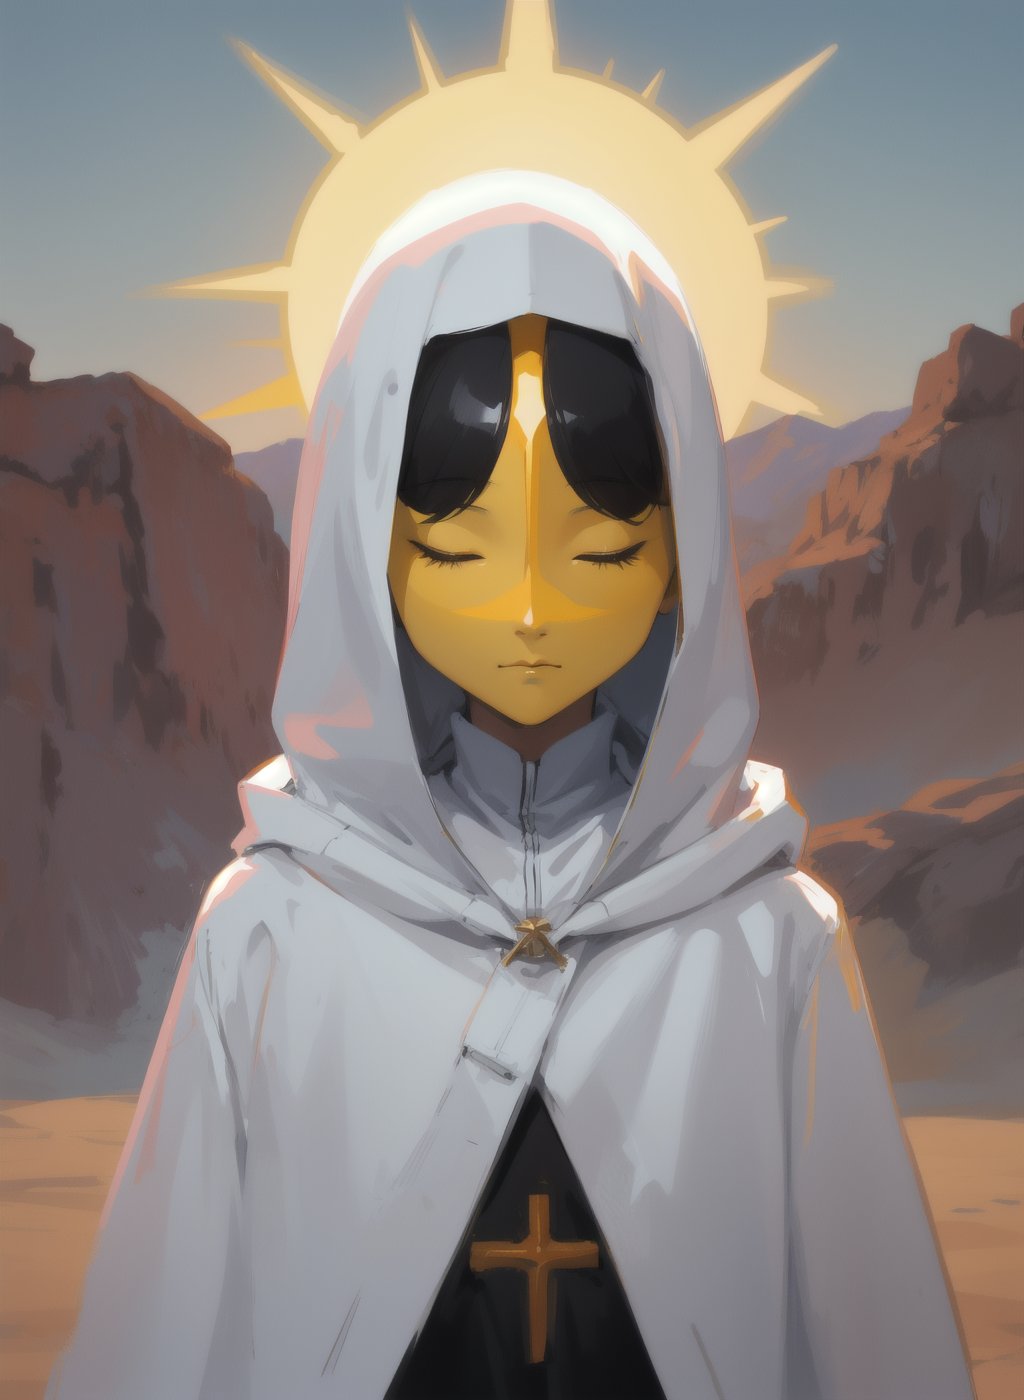 Priest of the sun. wearing a sun mask.